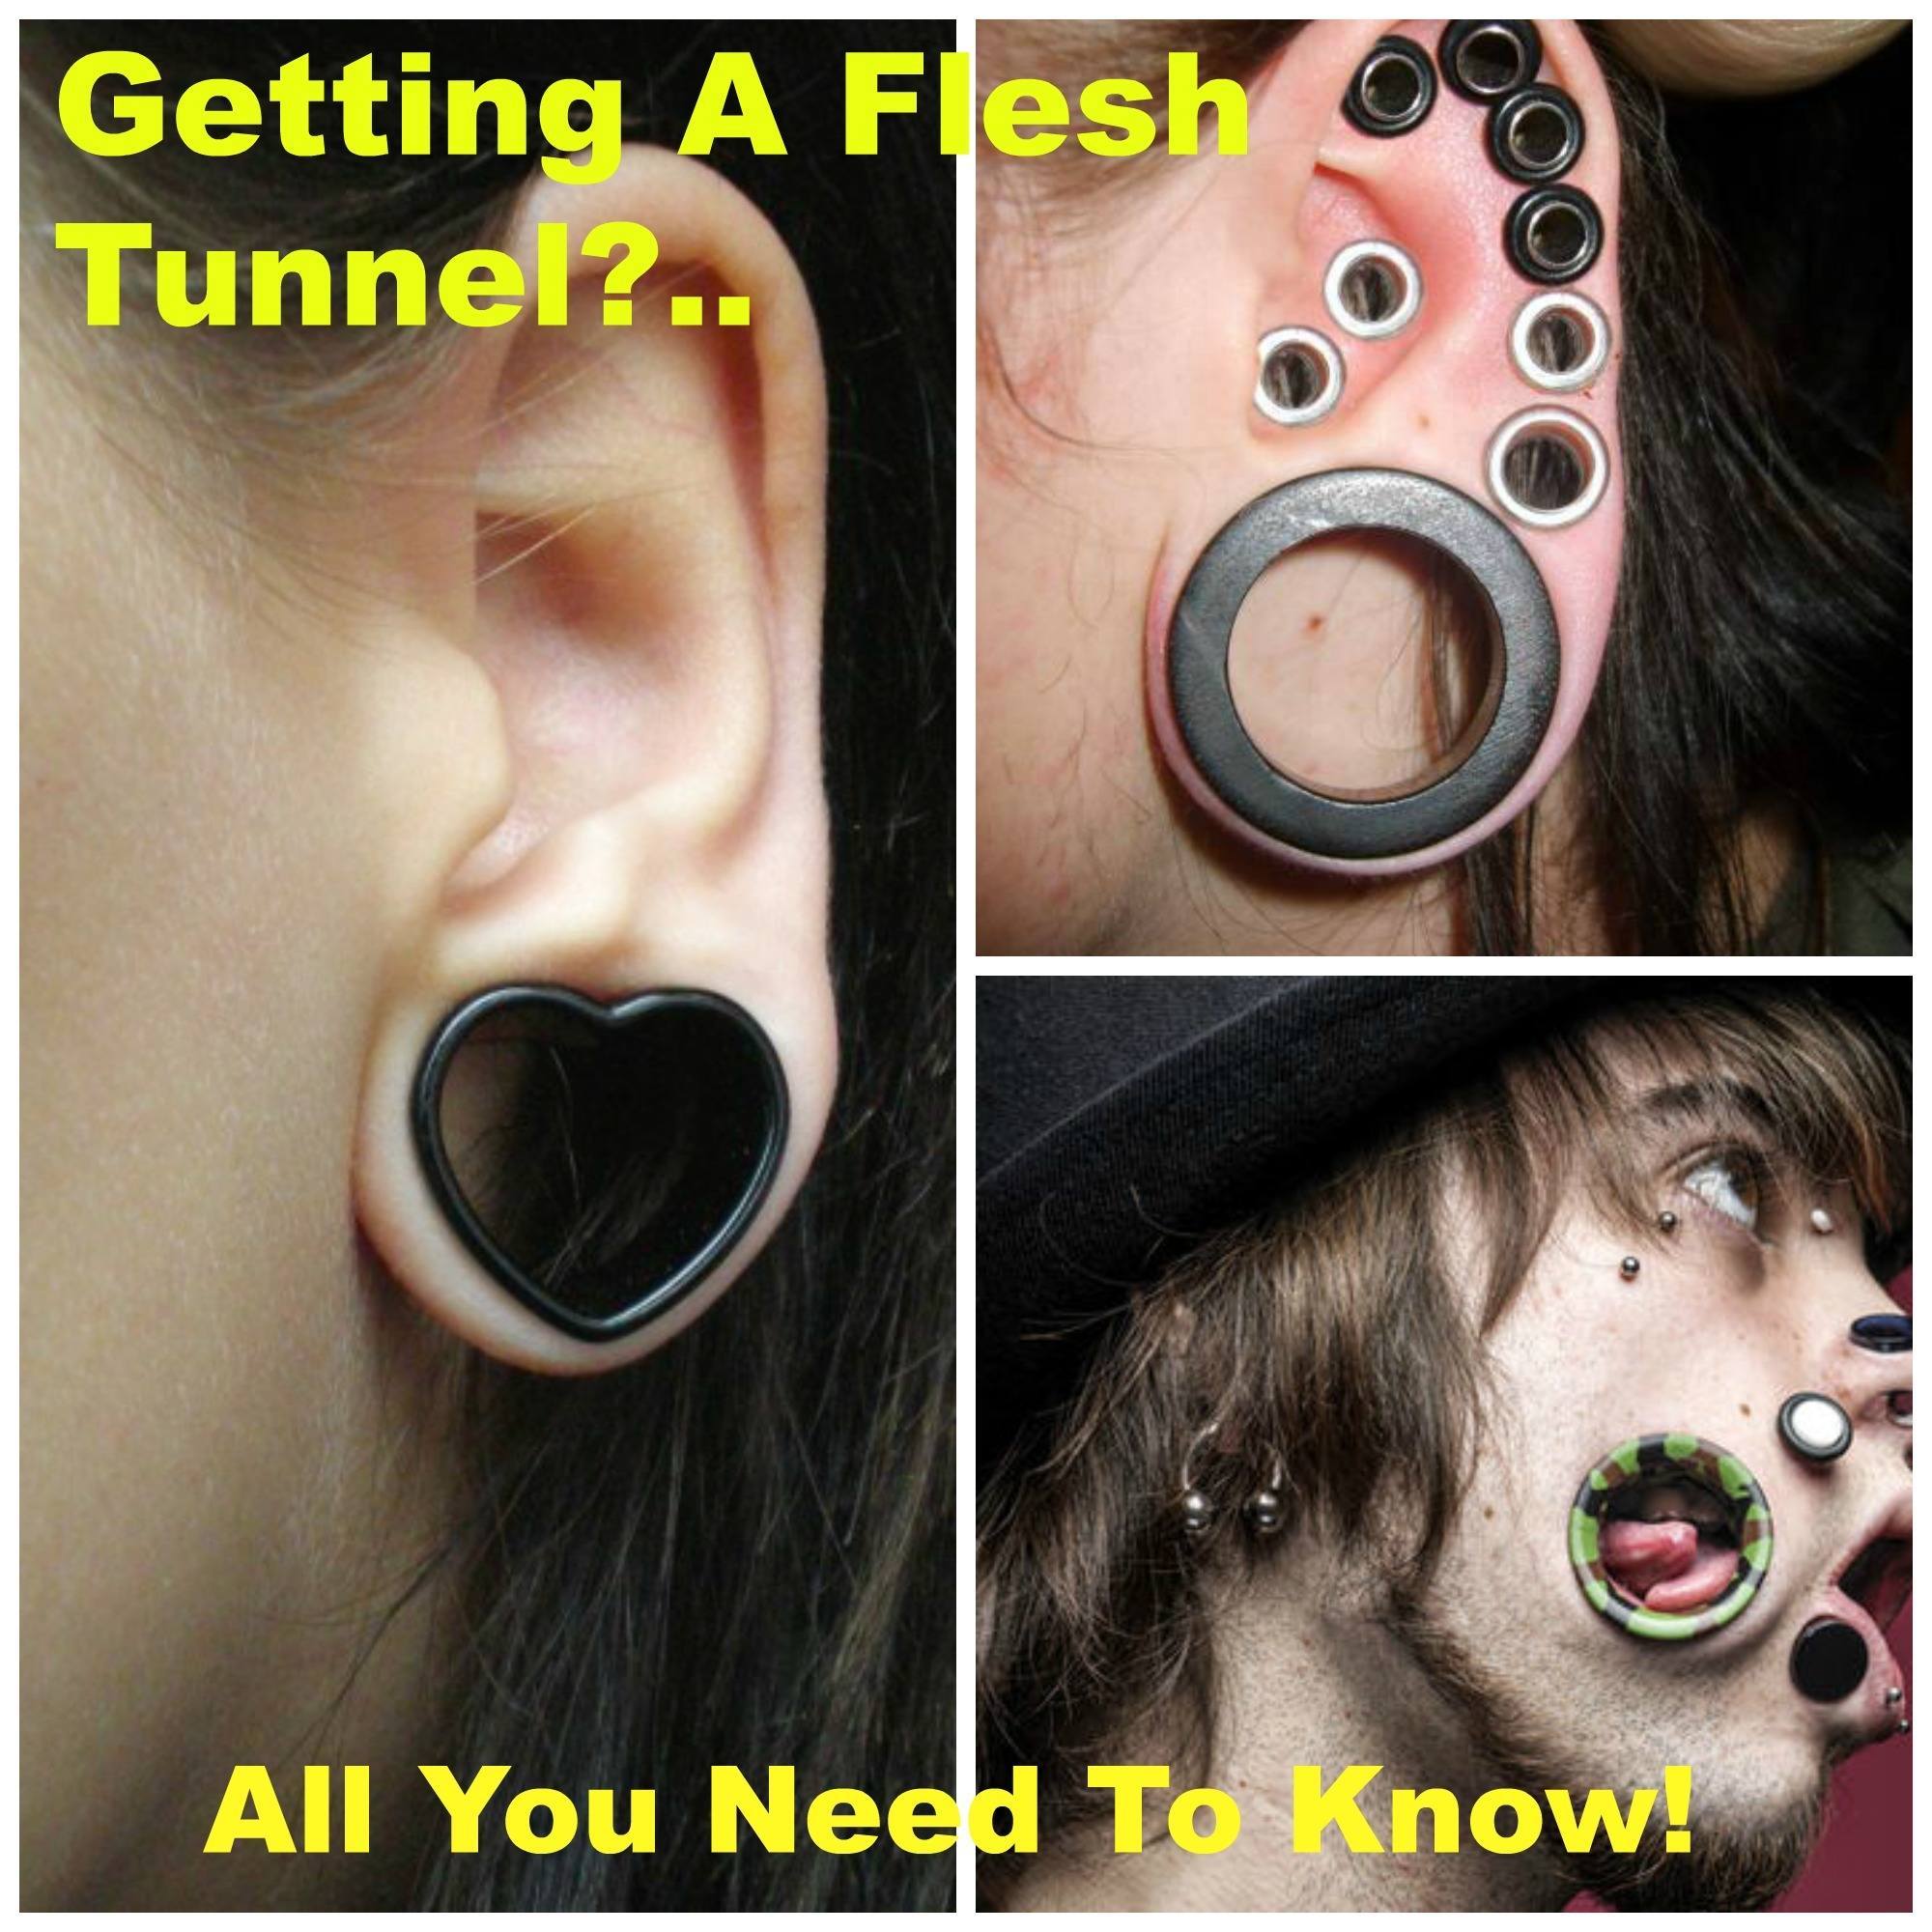 Getting A Flesh Tunnel – All You Need To Know